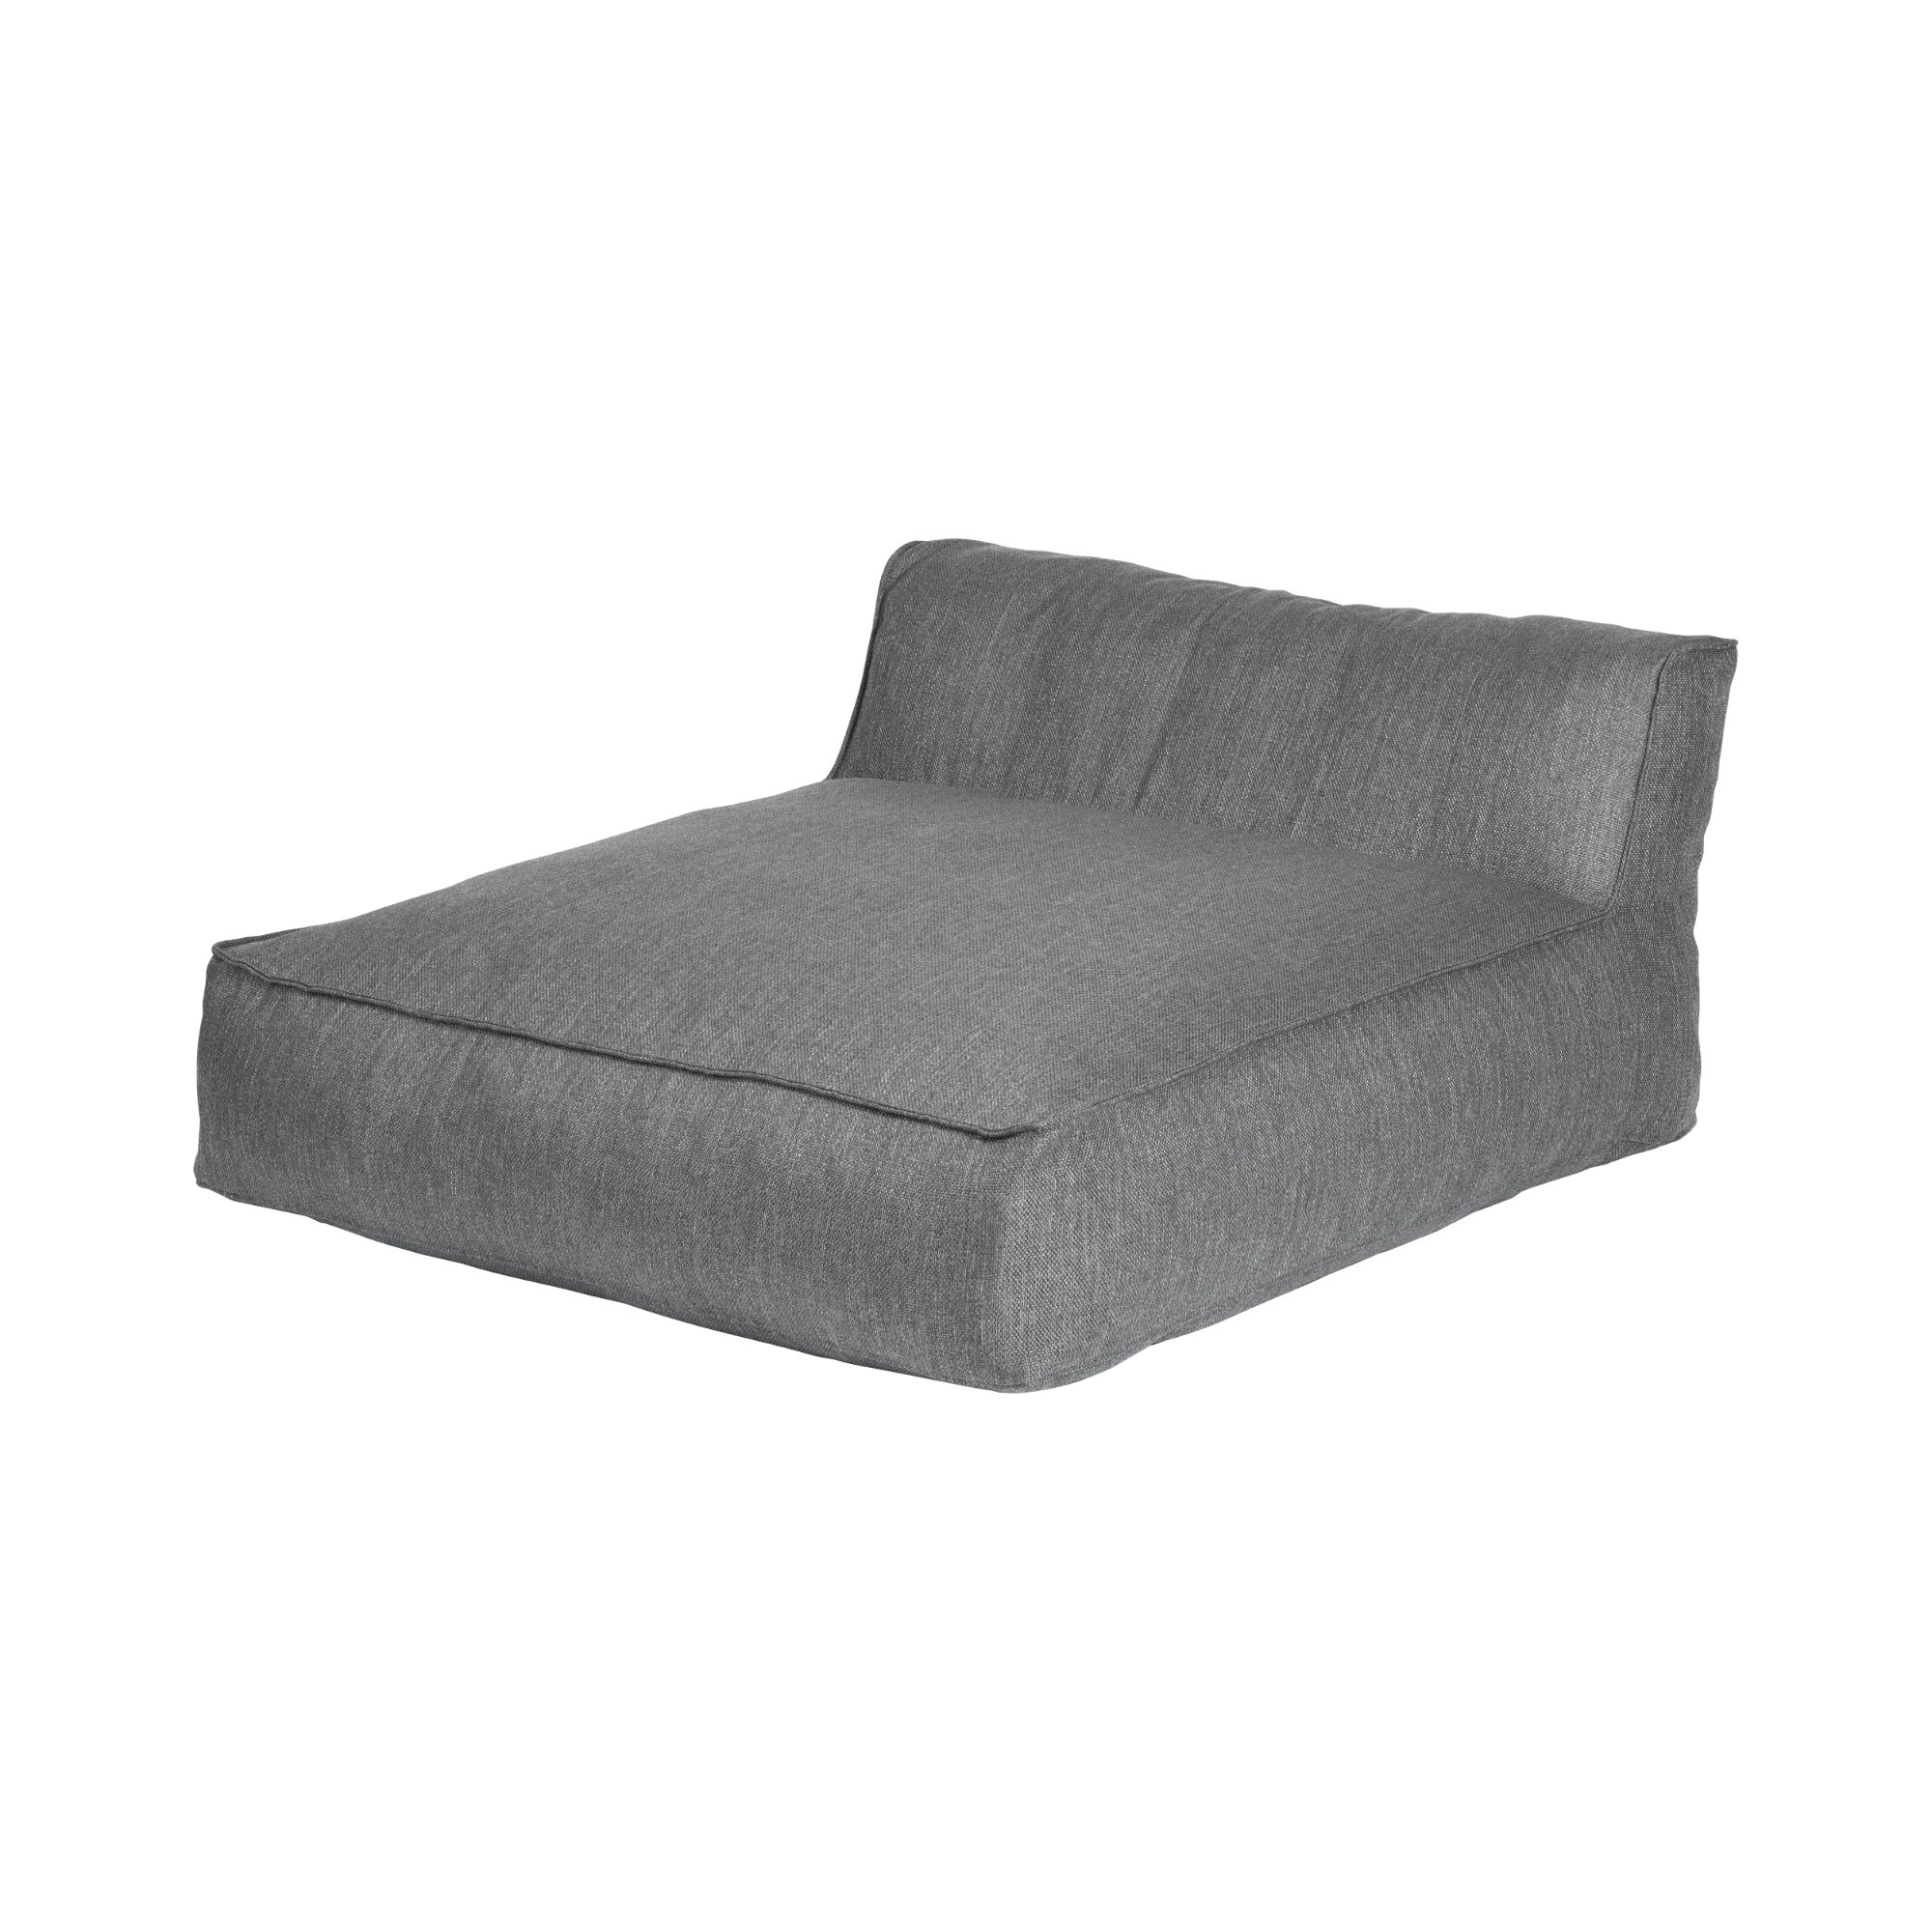 BLOMUS // GROW - OUTDOOR 2-SEATER CHAISE LONGUE | CHARCOAL